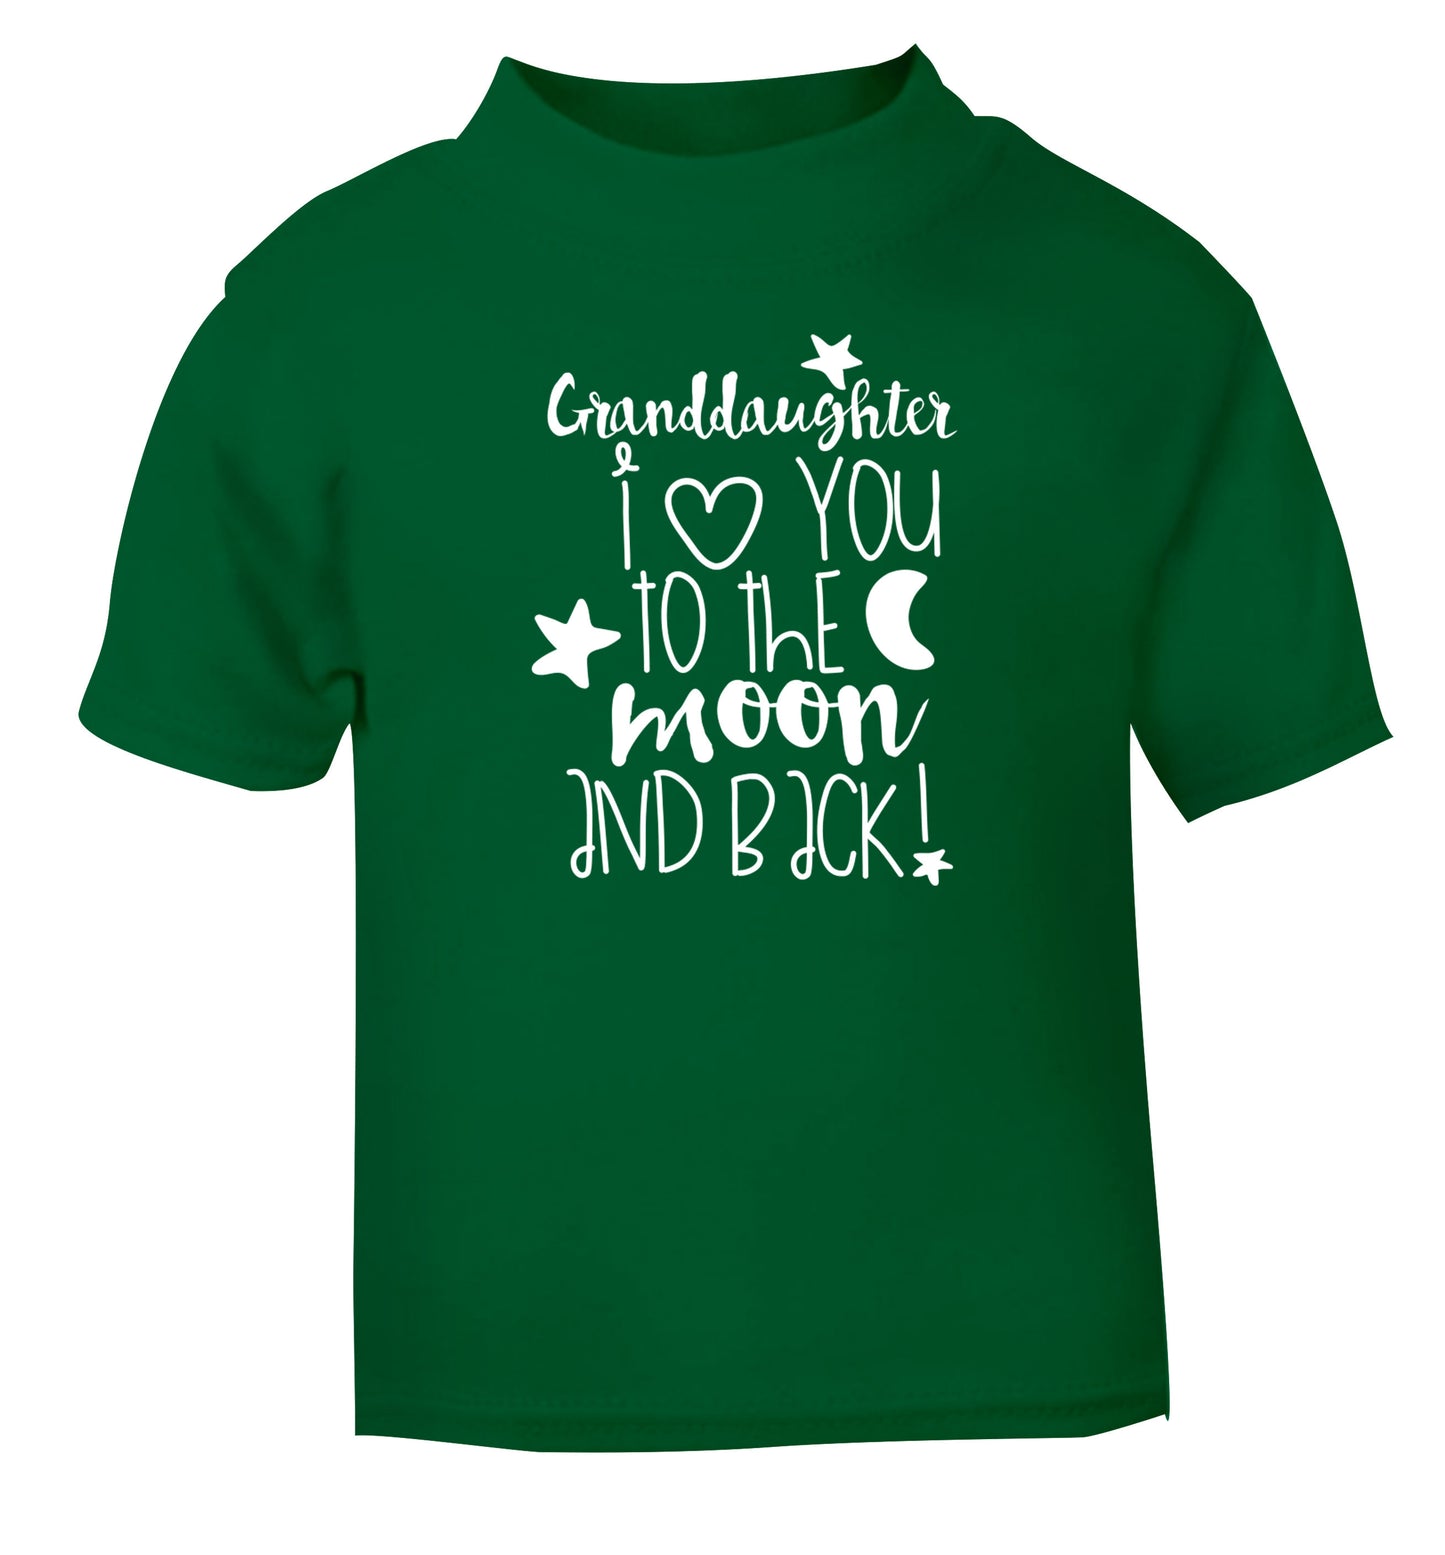 Granddaughter I love you to the moon and back green Baby Toddler Tshirt 2 Years